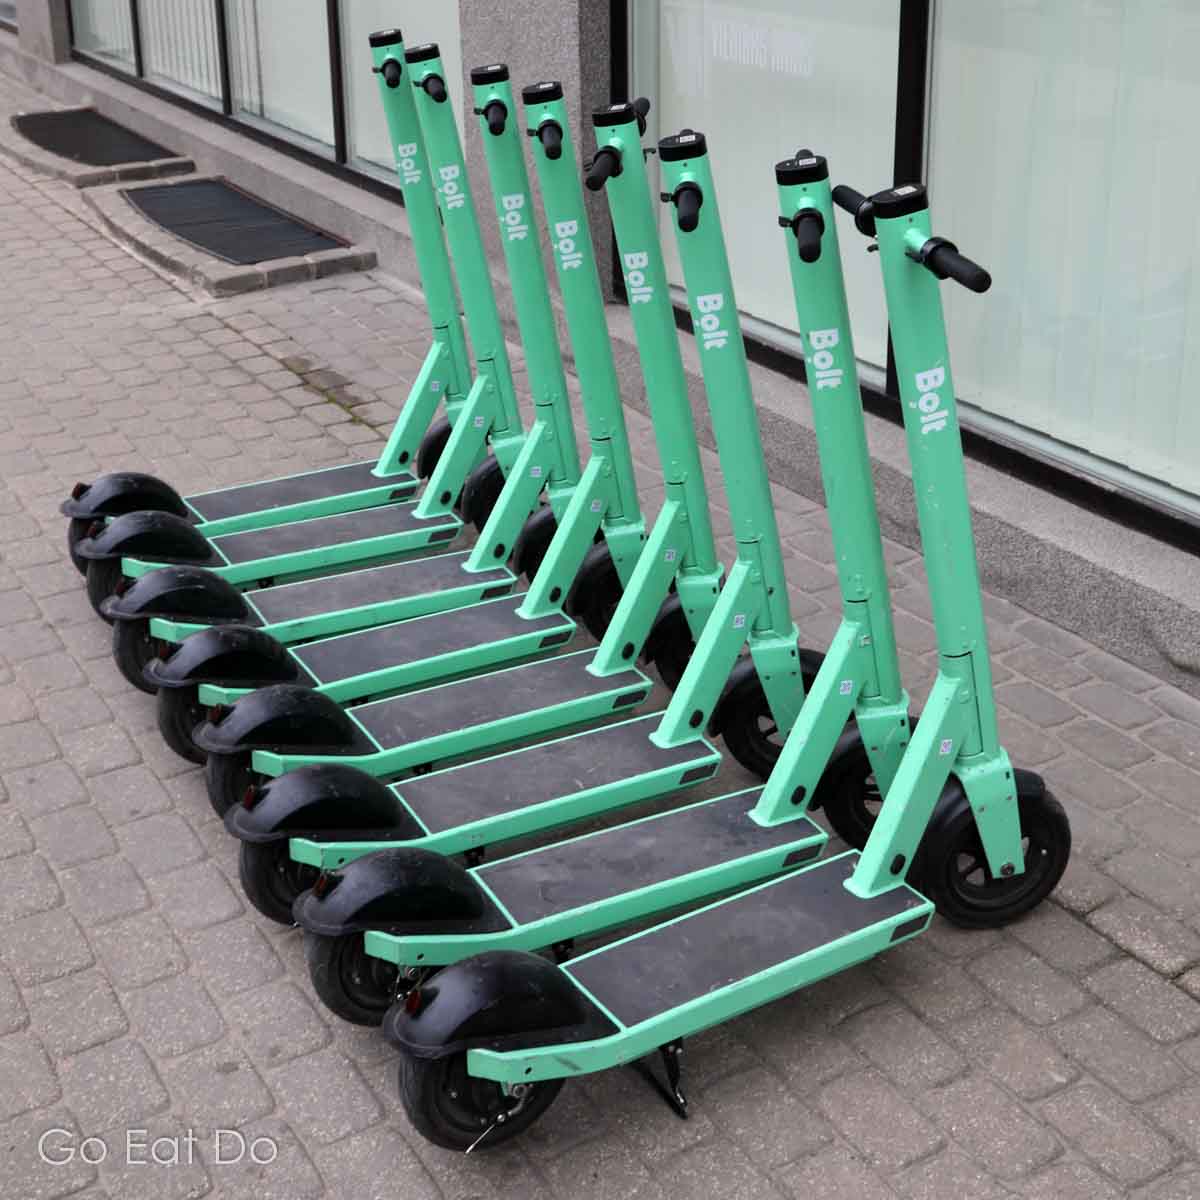 Electric scooters, available for hire via the Bolt app, are a way of exploring attractions in Daugavpils.